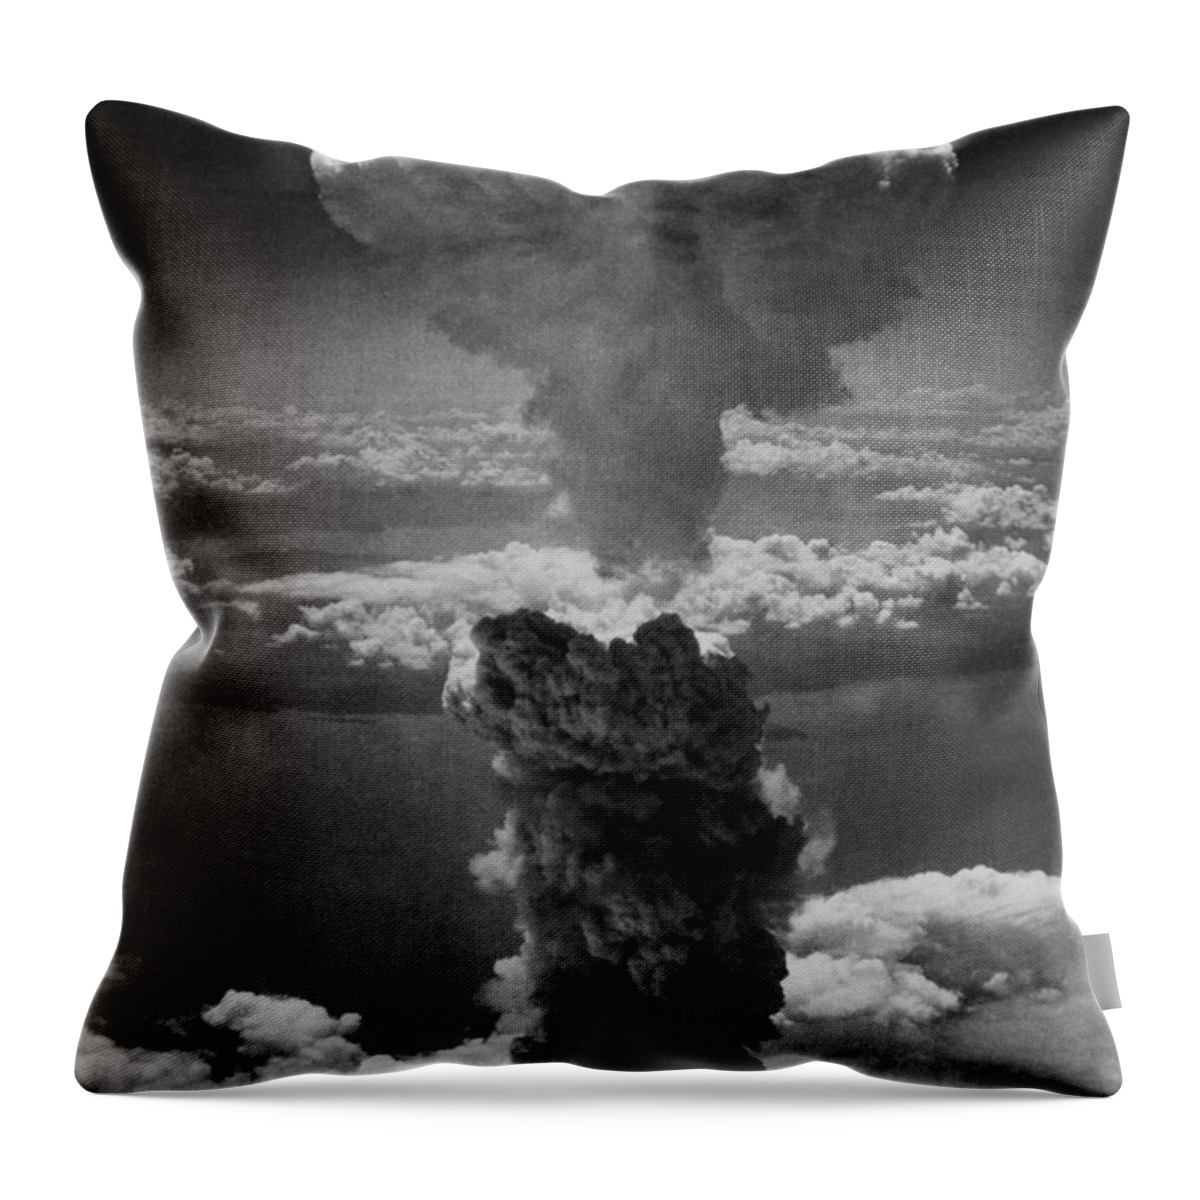 Atomic Bomb Throw Pillow featuring the photograph Mushroom Cloud Over Nagasaki by War Is Hell Store